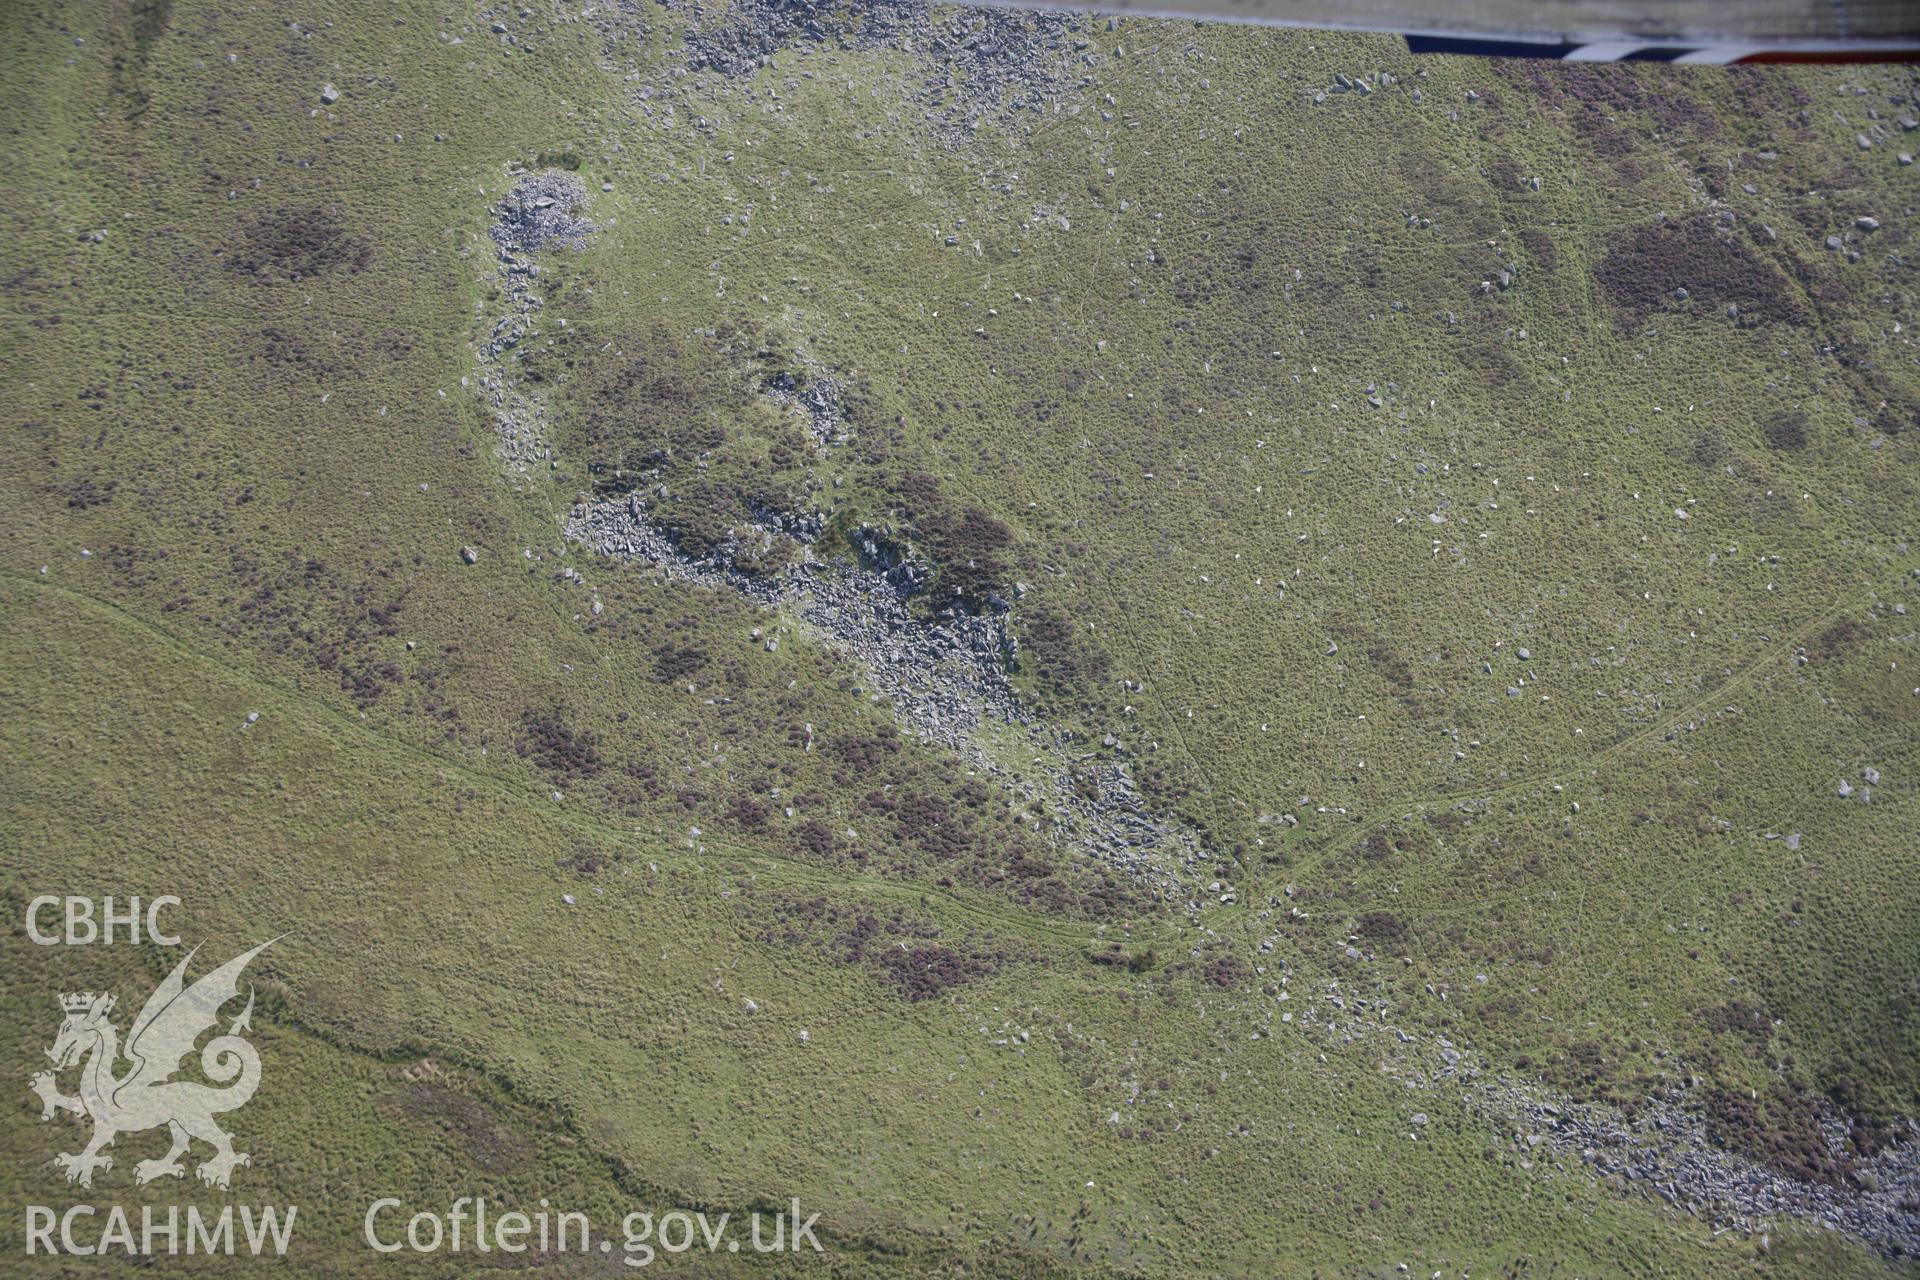 RCAHMW colour oblique photograph of Carn Menyn Cairn, showing 'stone river' below. Taken by Toby Driver on 11/09/2007.